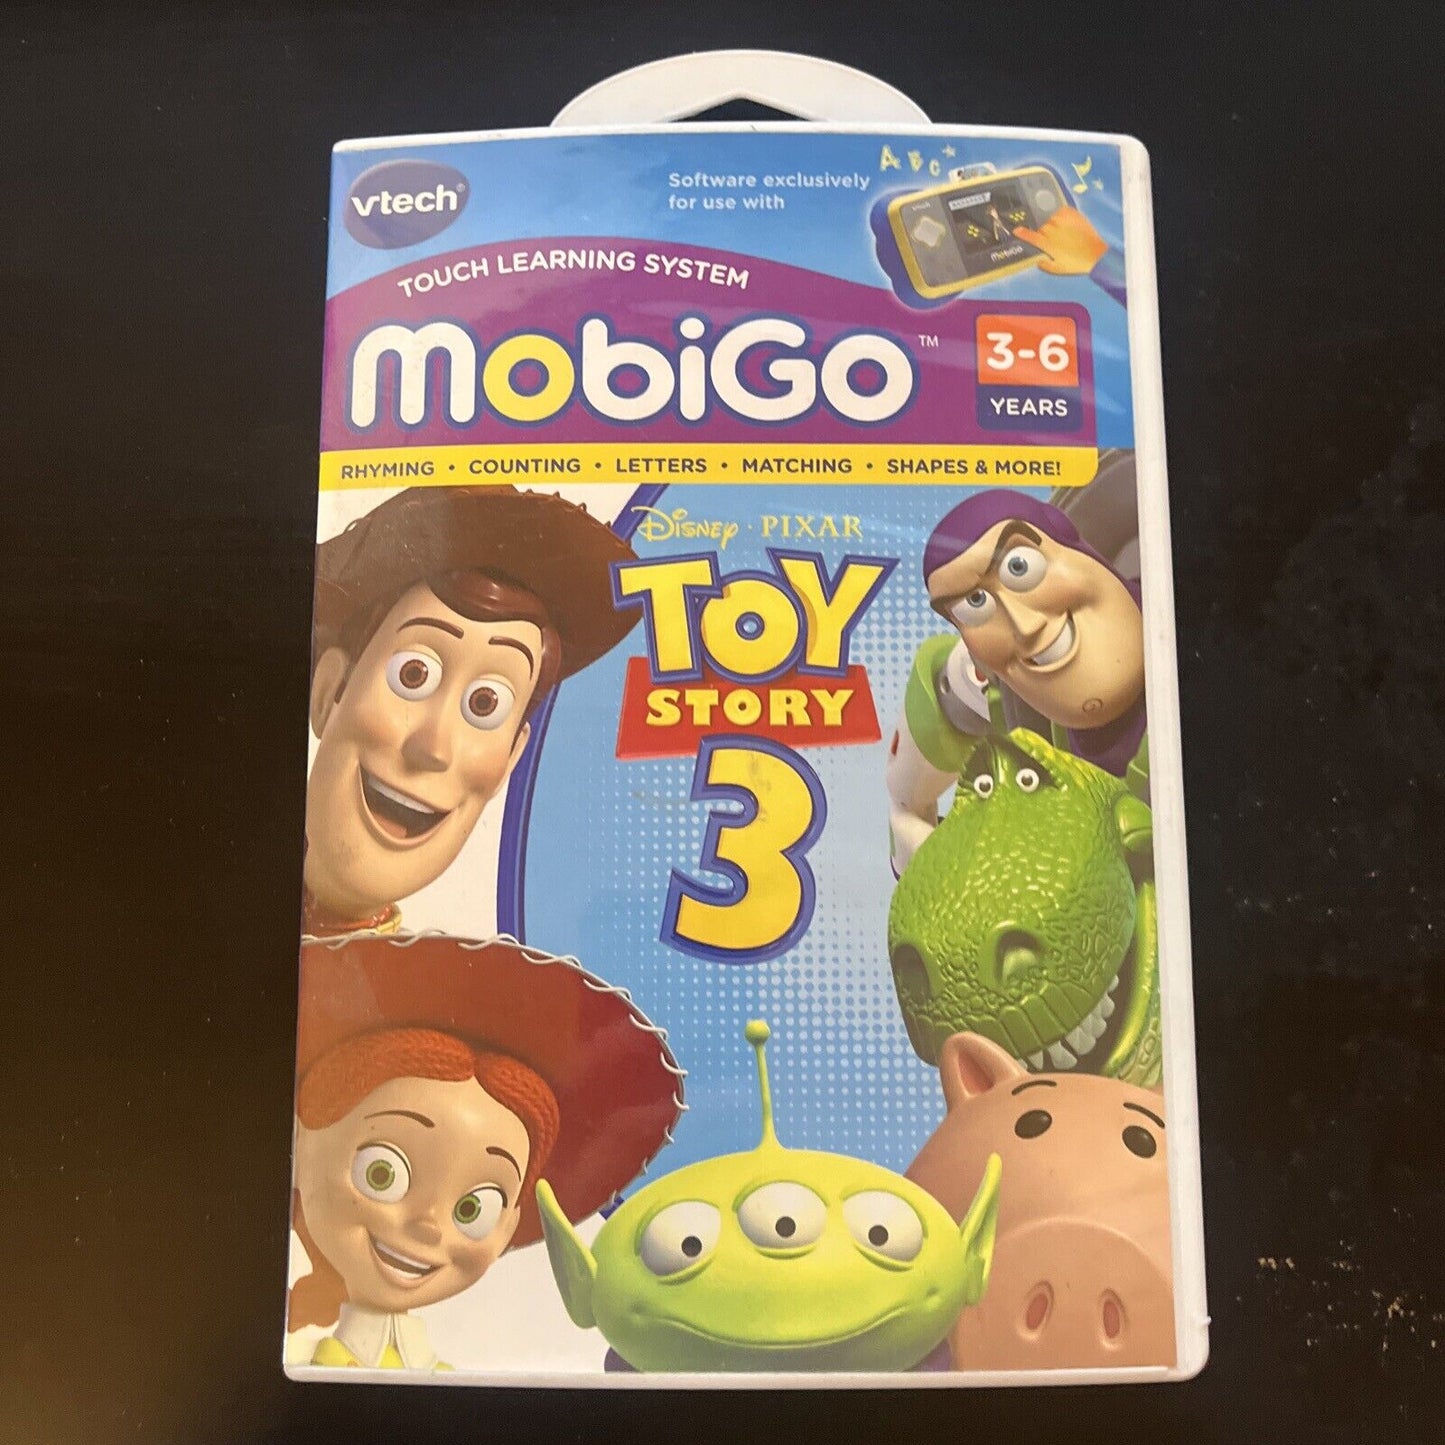 4x Mobigo Games: Mickey Mouse, Scooby-Doo, Jake Never Land Pirates, Toy Story 3